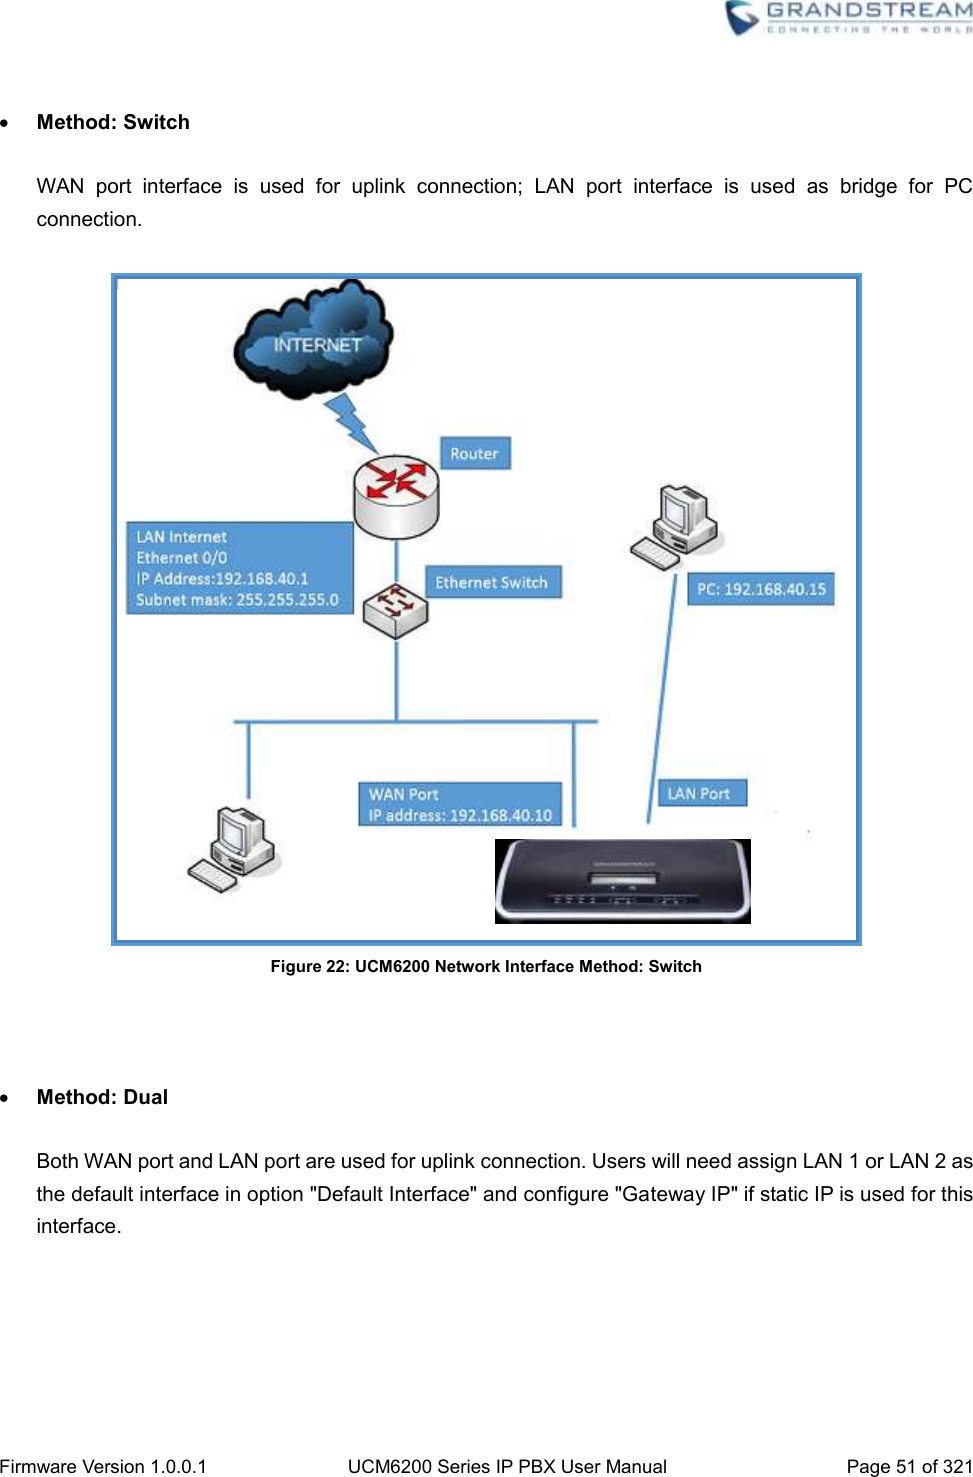  Firmware Version 1.0.0.1 UCM6200 Series IP PBX User Manual Page 51 of 321      Method: Switch  WAN  port  interface  is  used  for  uplink  connection;  LAN  port  interface  is  used  as  bridge  for  PC connection.   Figure 22: UCM6200 Network Interface Method: Switch     Method: Dual  Both WAN port and LAN port are used for uplink connection. Users will need assign LAN 1 or LAN 2 as the default interface in option &quot;Default Interface&quot; and configure &quot;Gateway IP&quot; if static IP is used for this interface.  